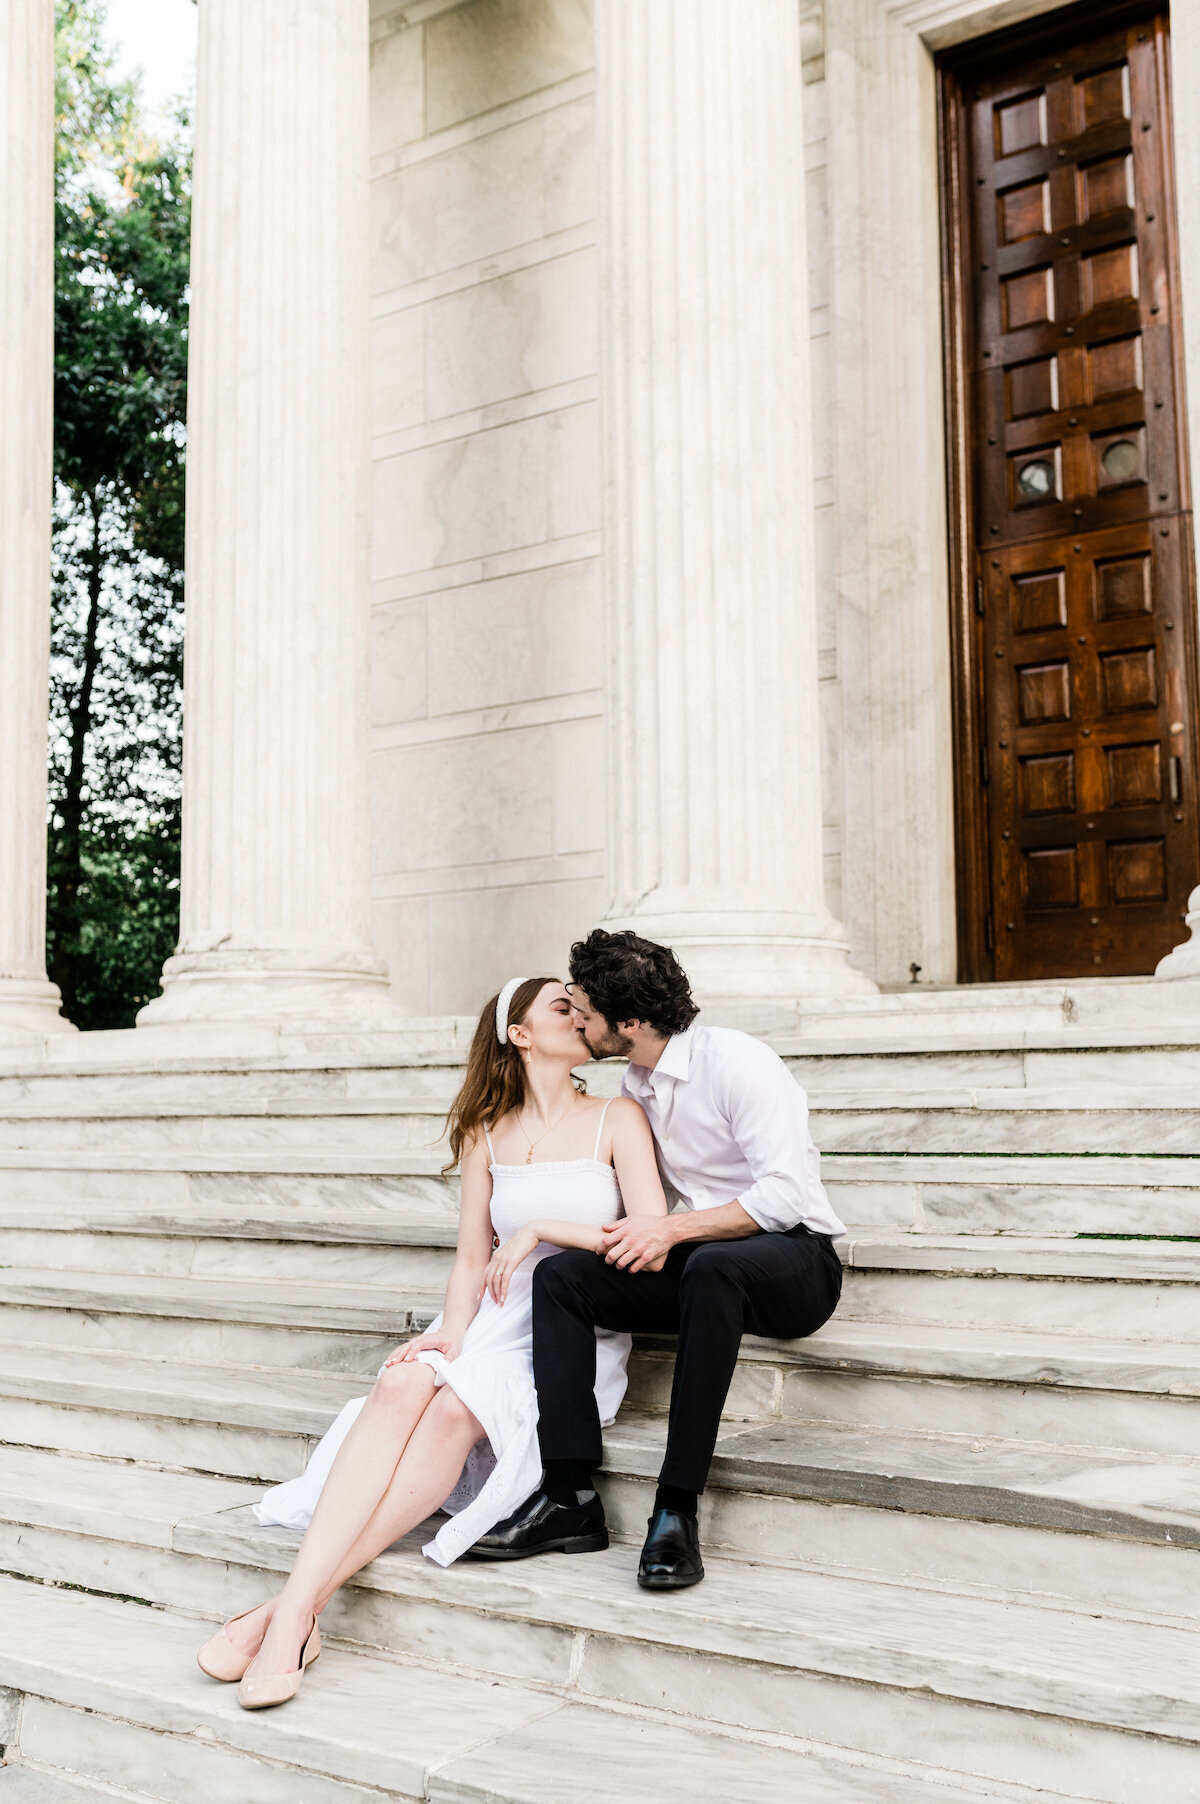 Step into the pages of your own love story with our editorial engagement sessions. In the heart of Princeton, we craft images that showcase the artful composition and genuine emotions.